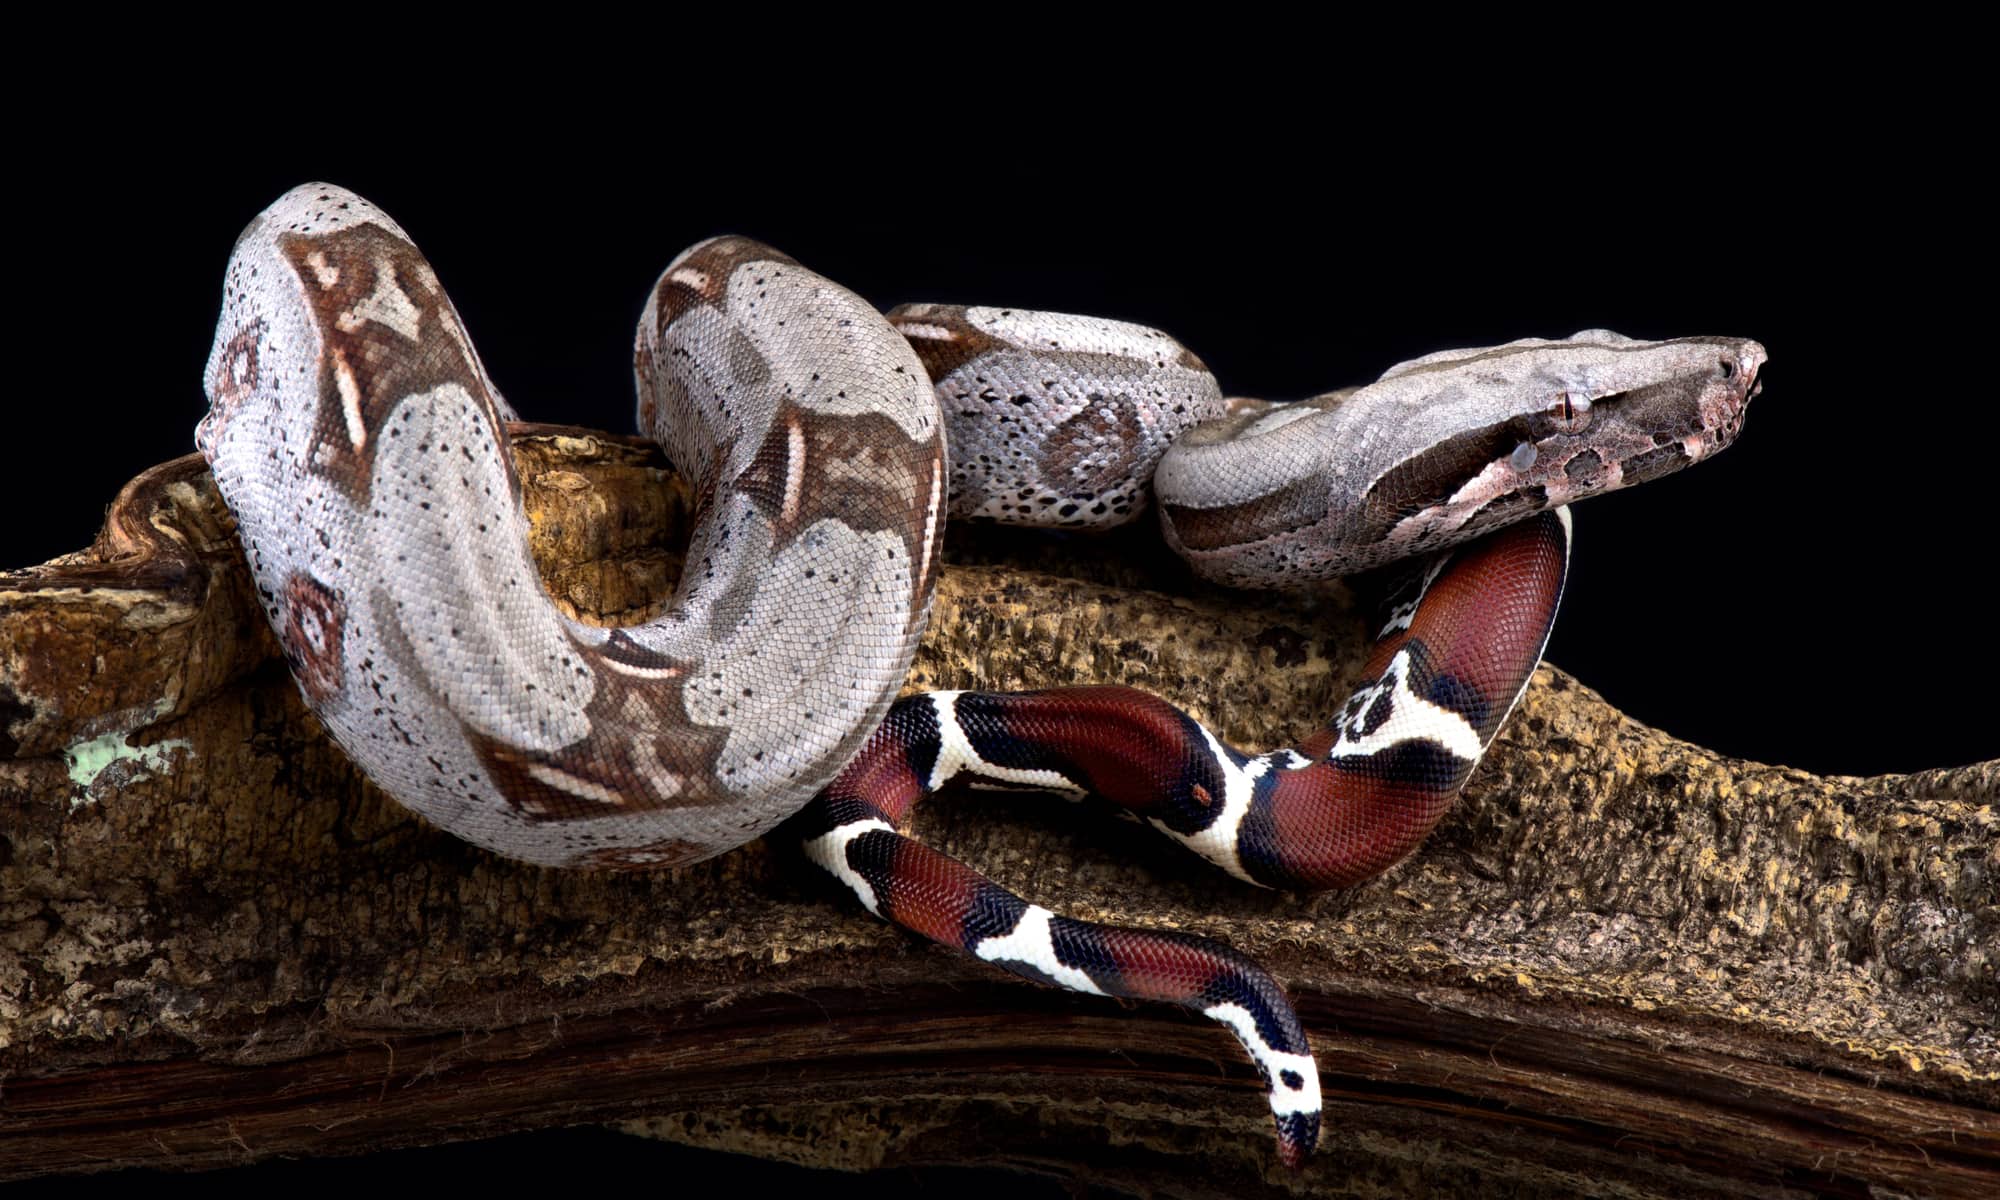 A Guide to Caring for Pet Central American Boas